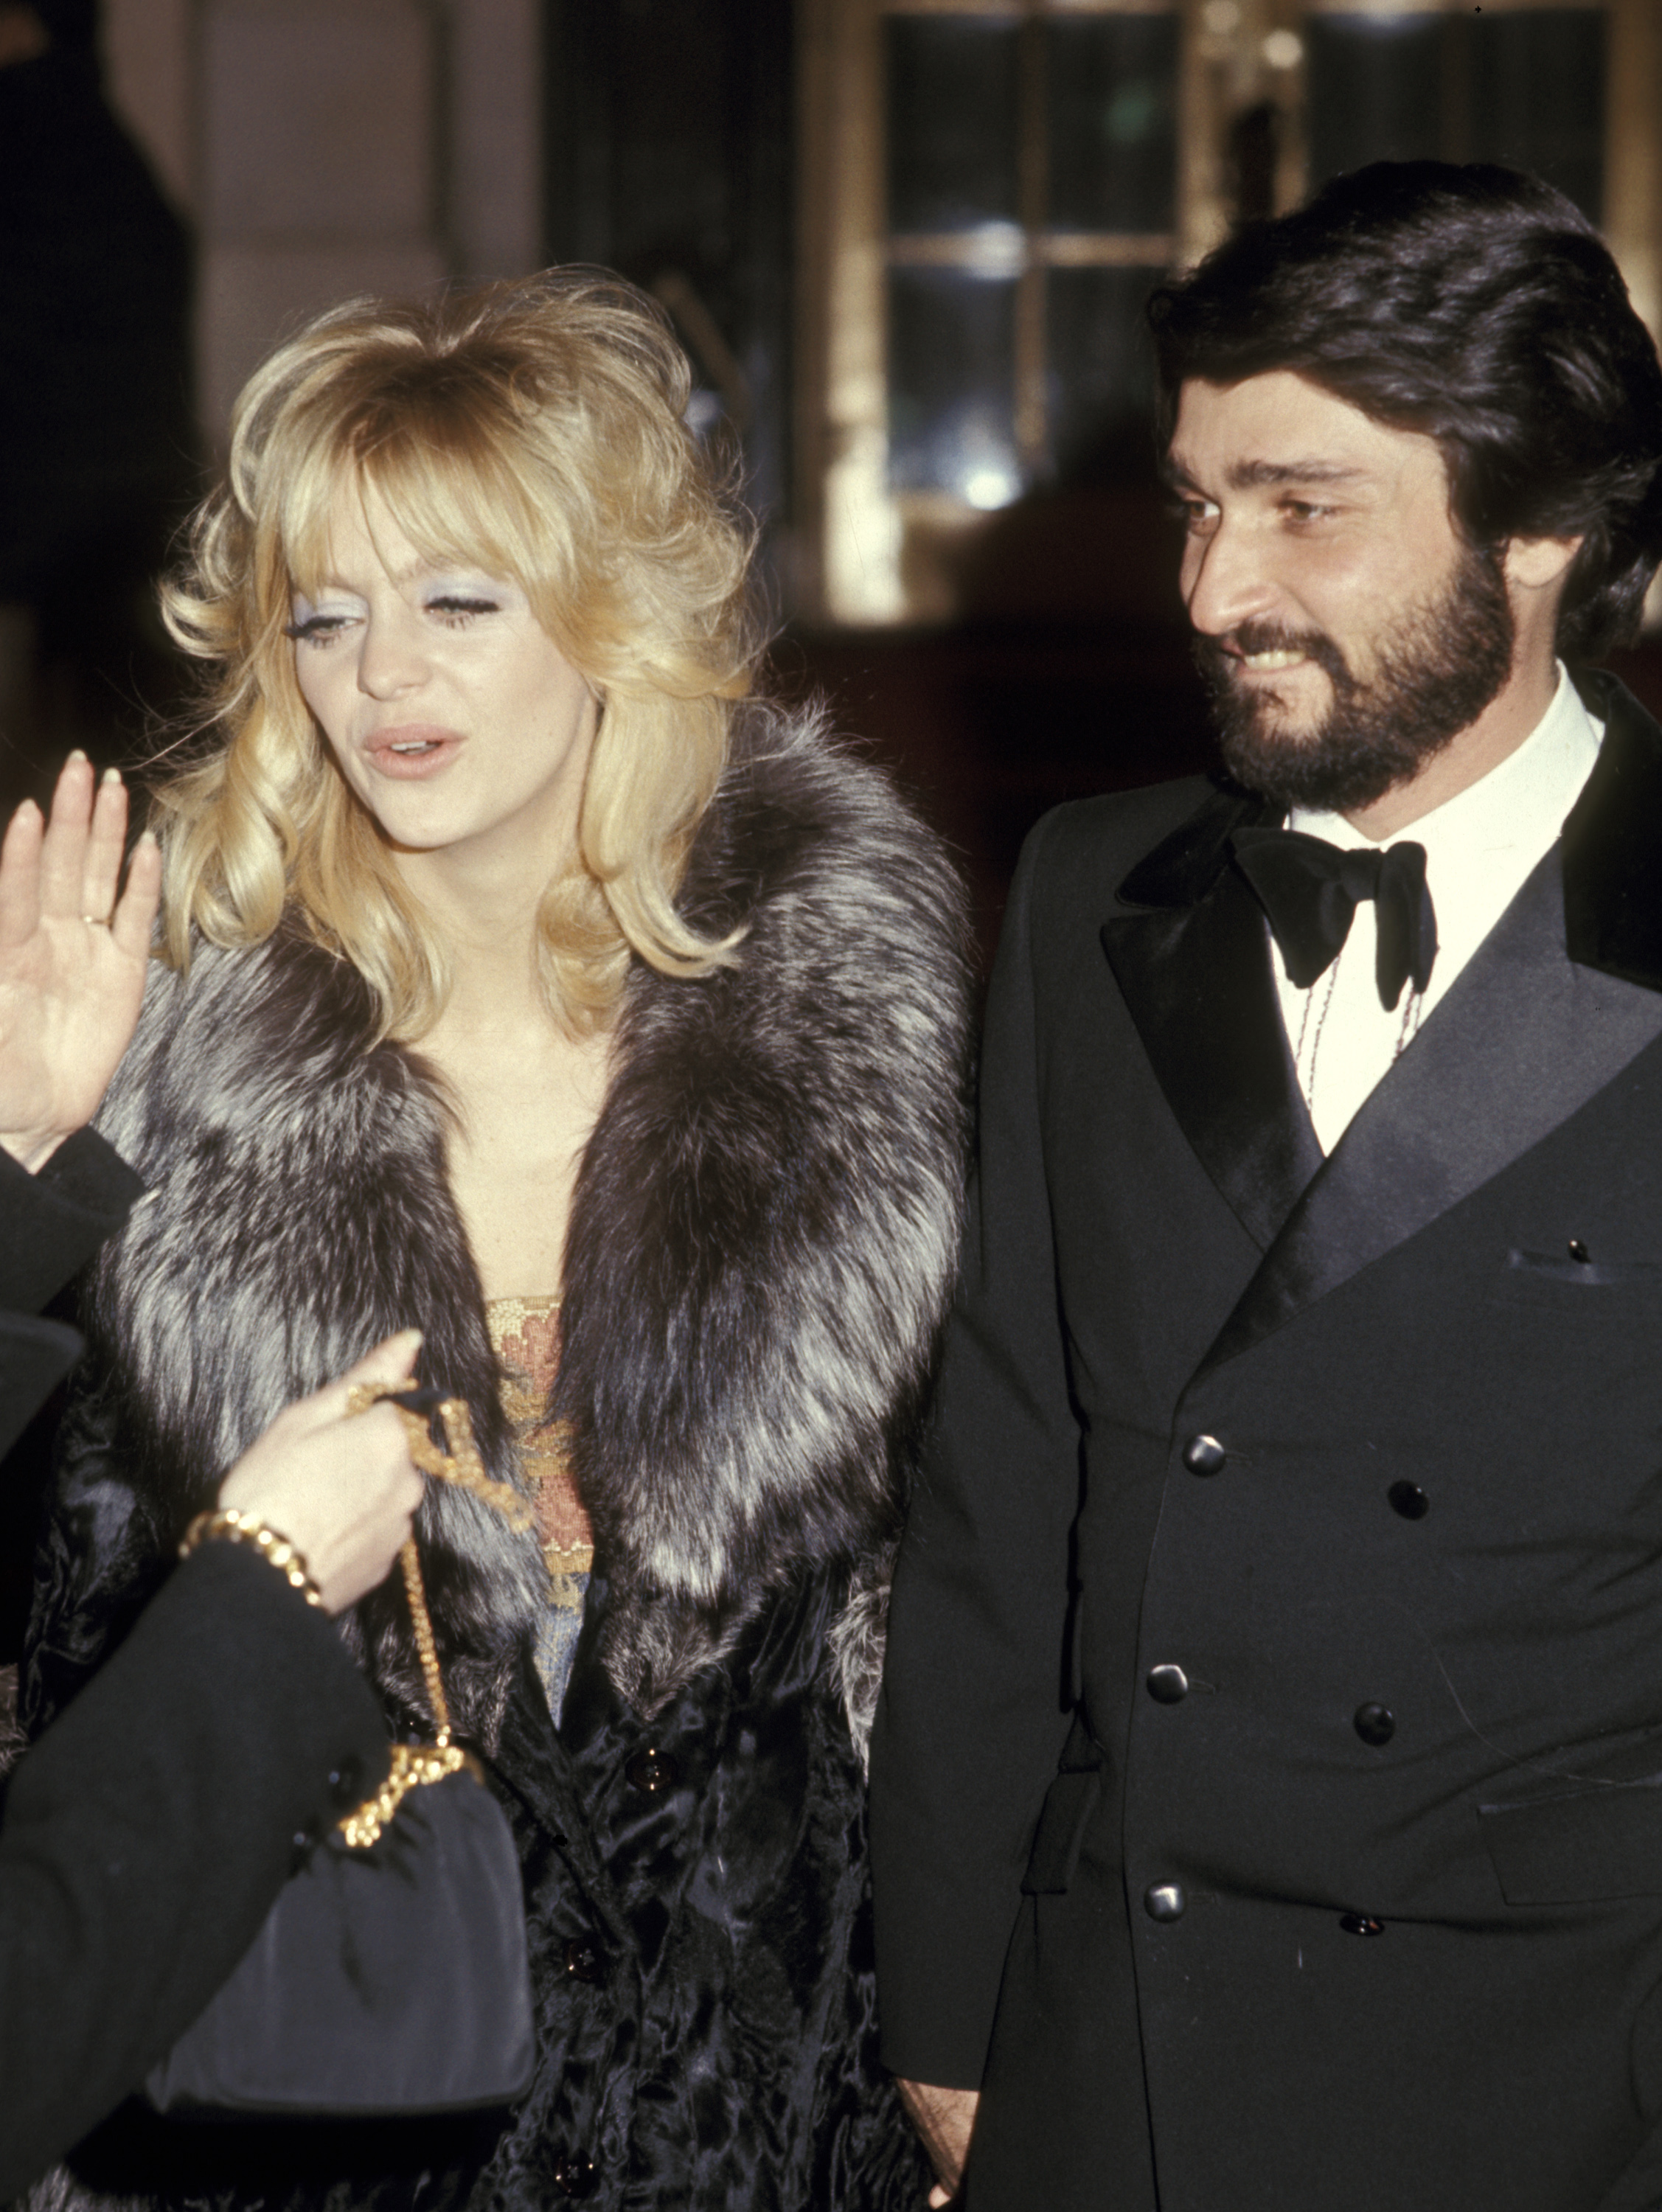 Goldie Hawn and Husband Gus Trikonis at the "There's a Girl in My Soup" New York premiere. | Source: Getty Images